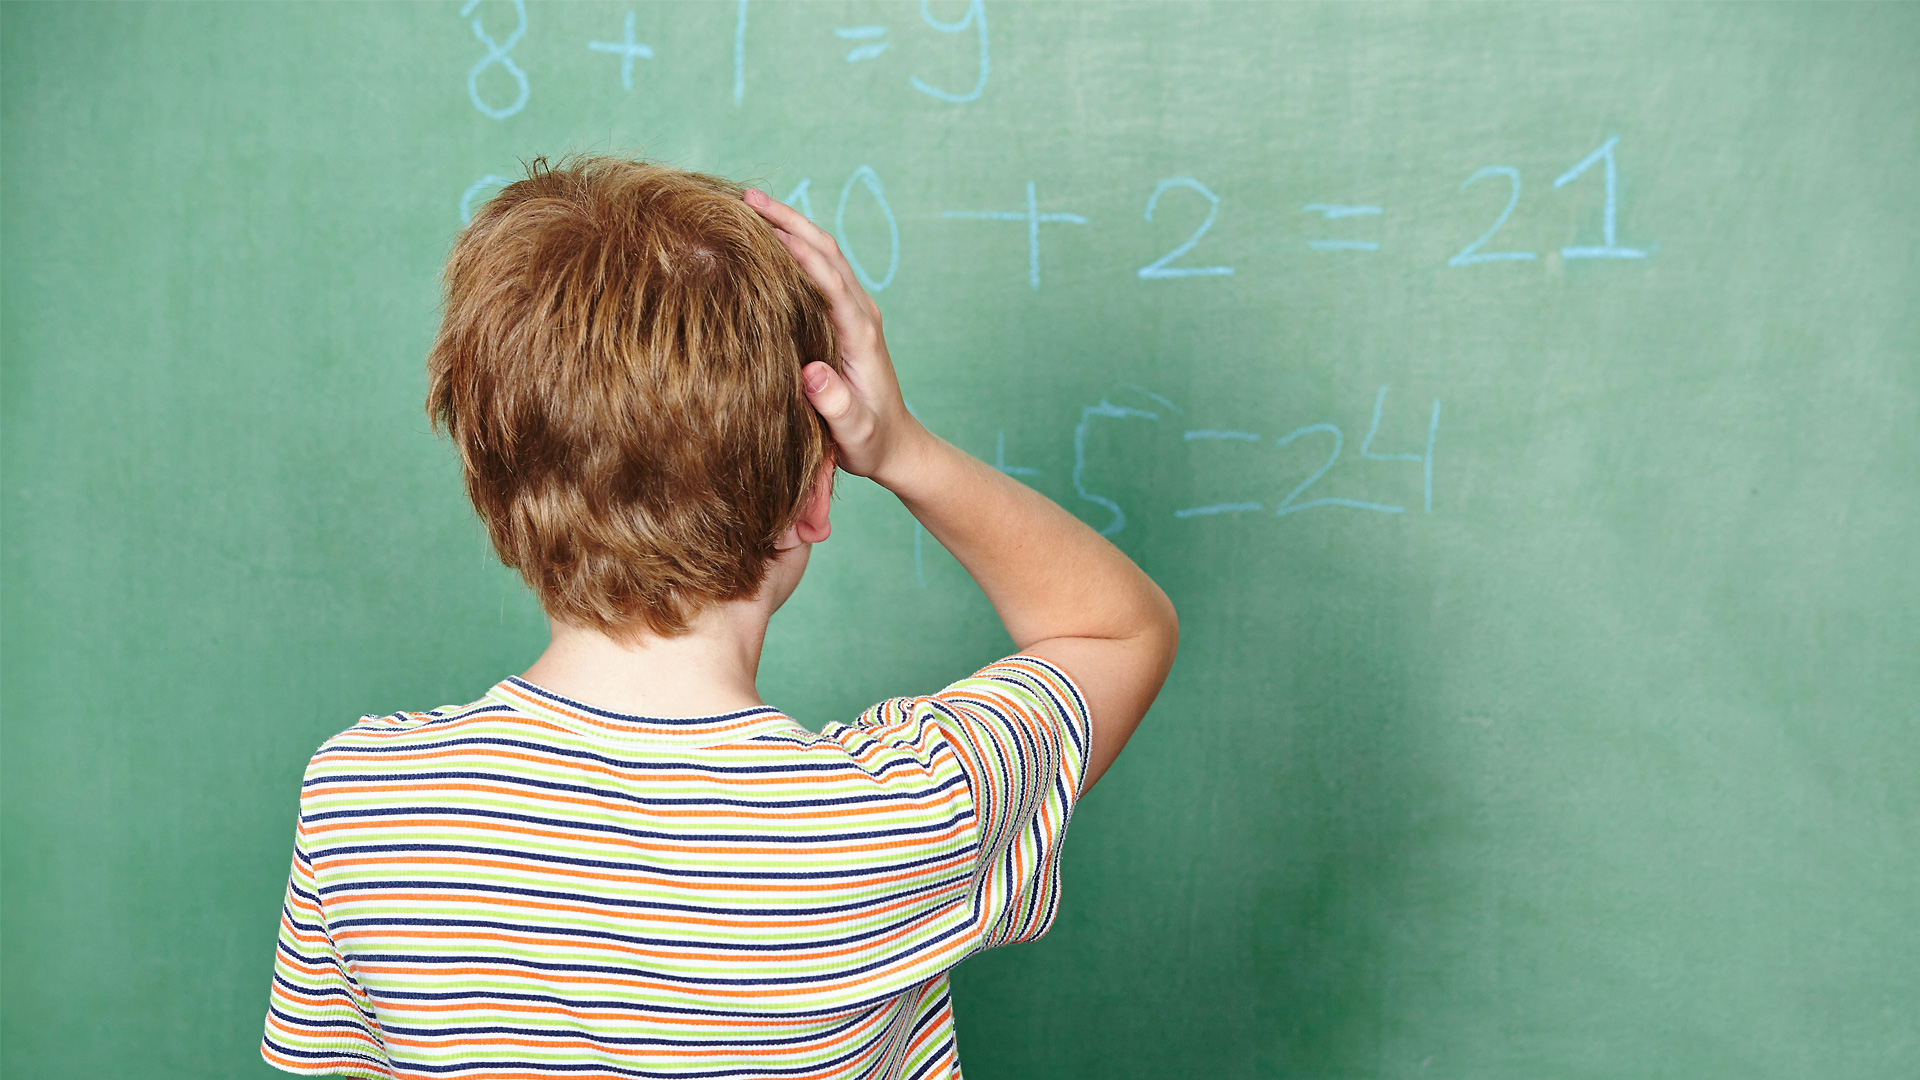 What is developmental dyscalculia and what does it look like in the brain?